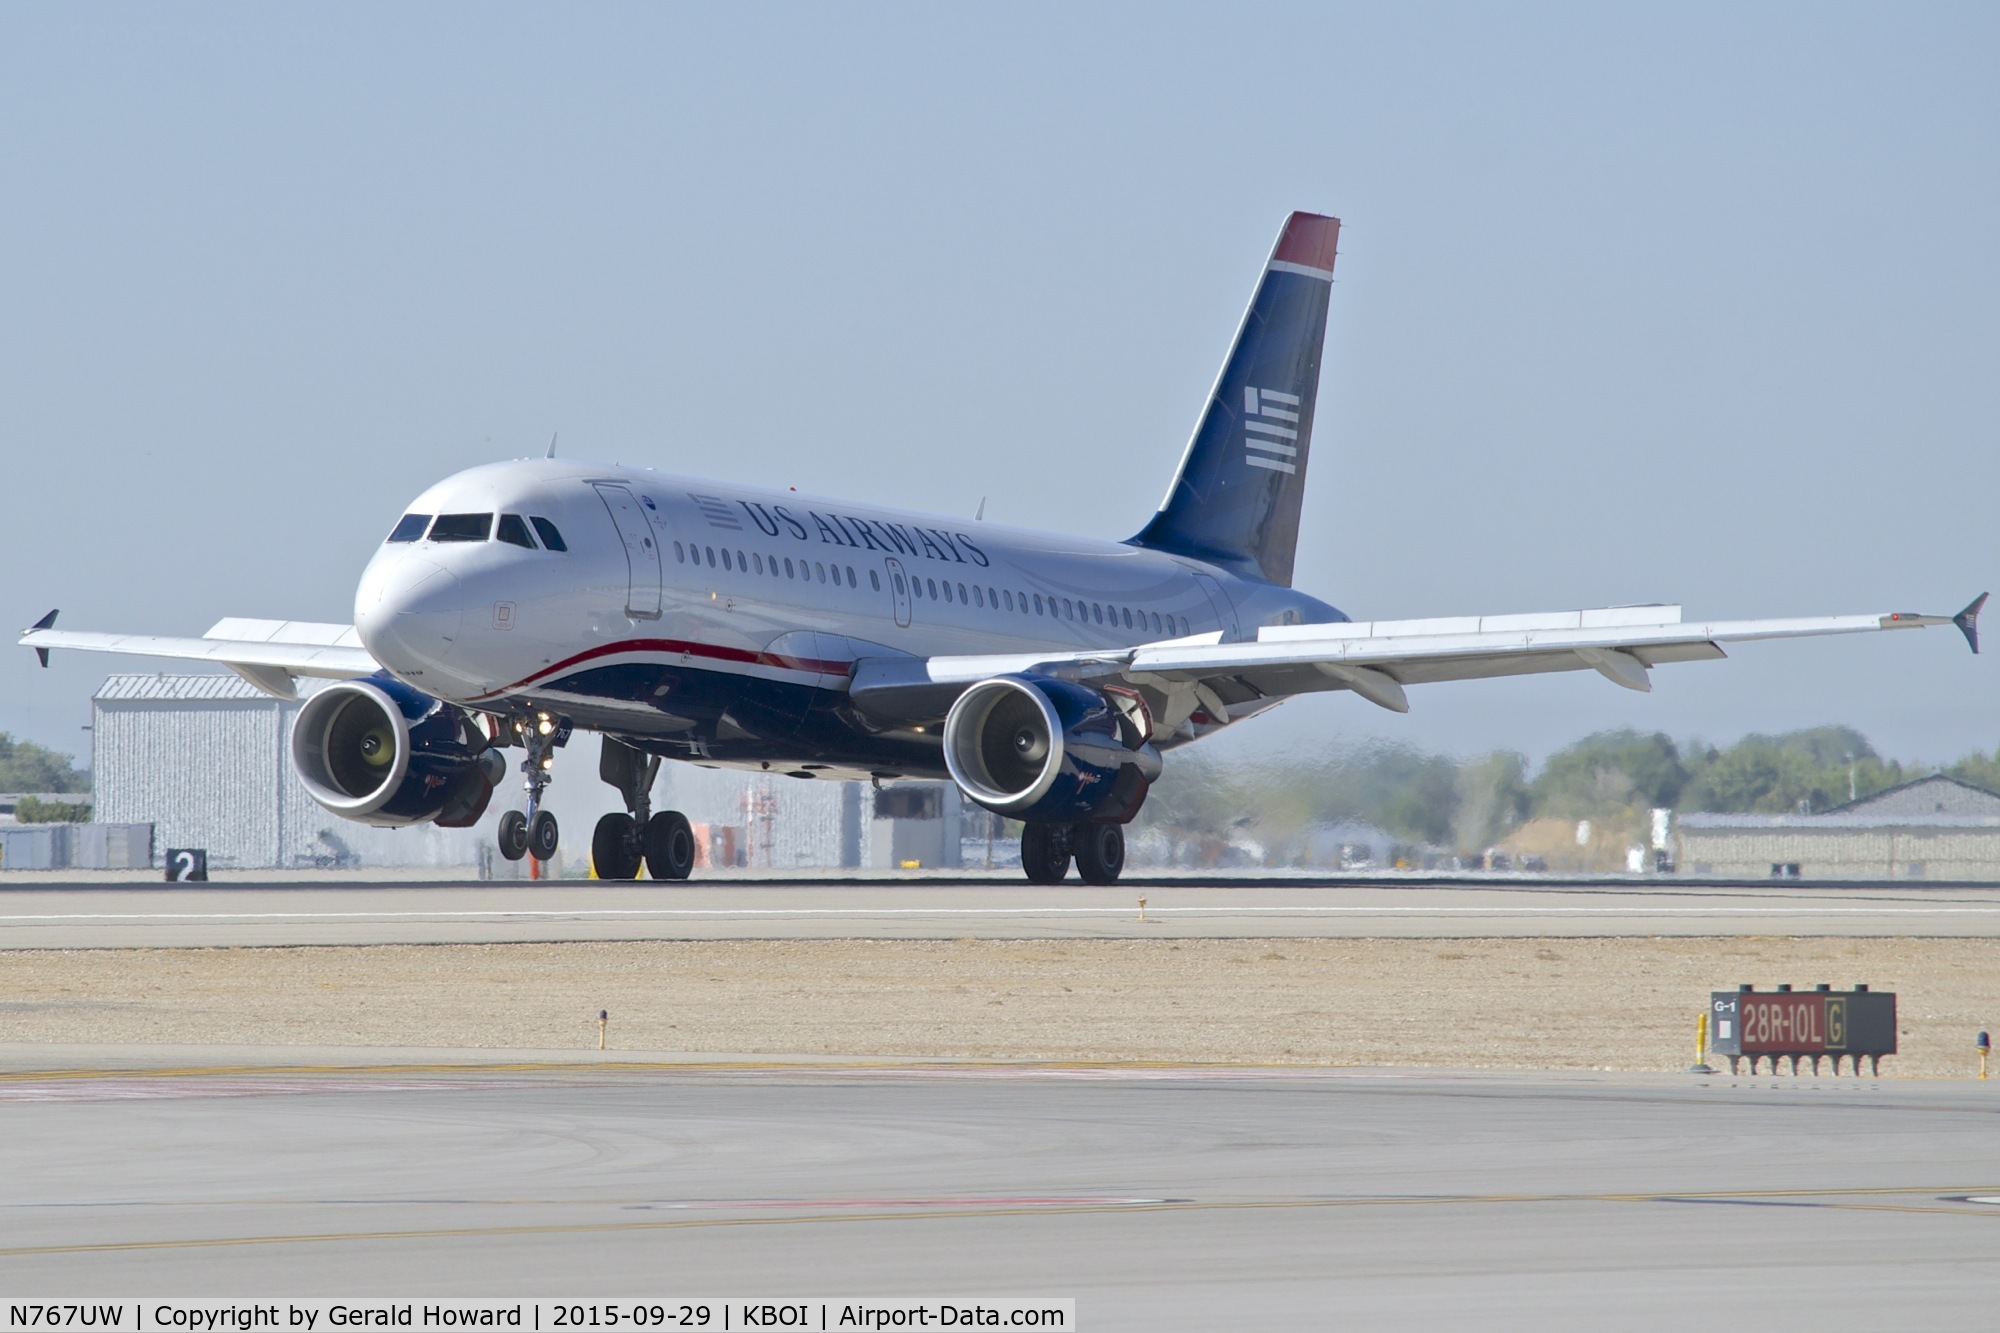 N767UW, 2000 Airbus A319-112 C/N 1382, Landing RWY 10L. Reverse thrusters out before the nose wheel is down.